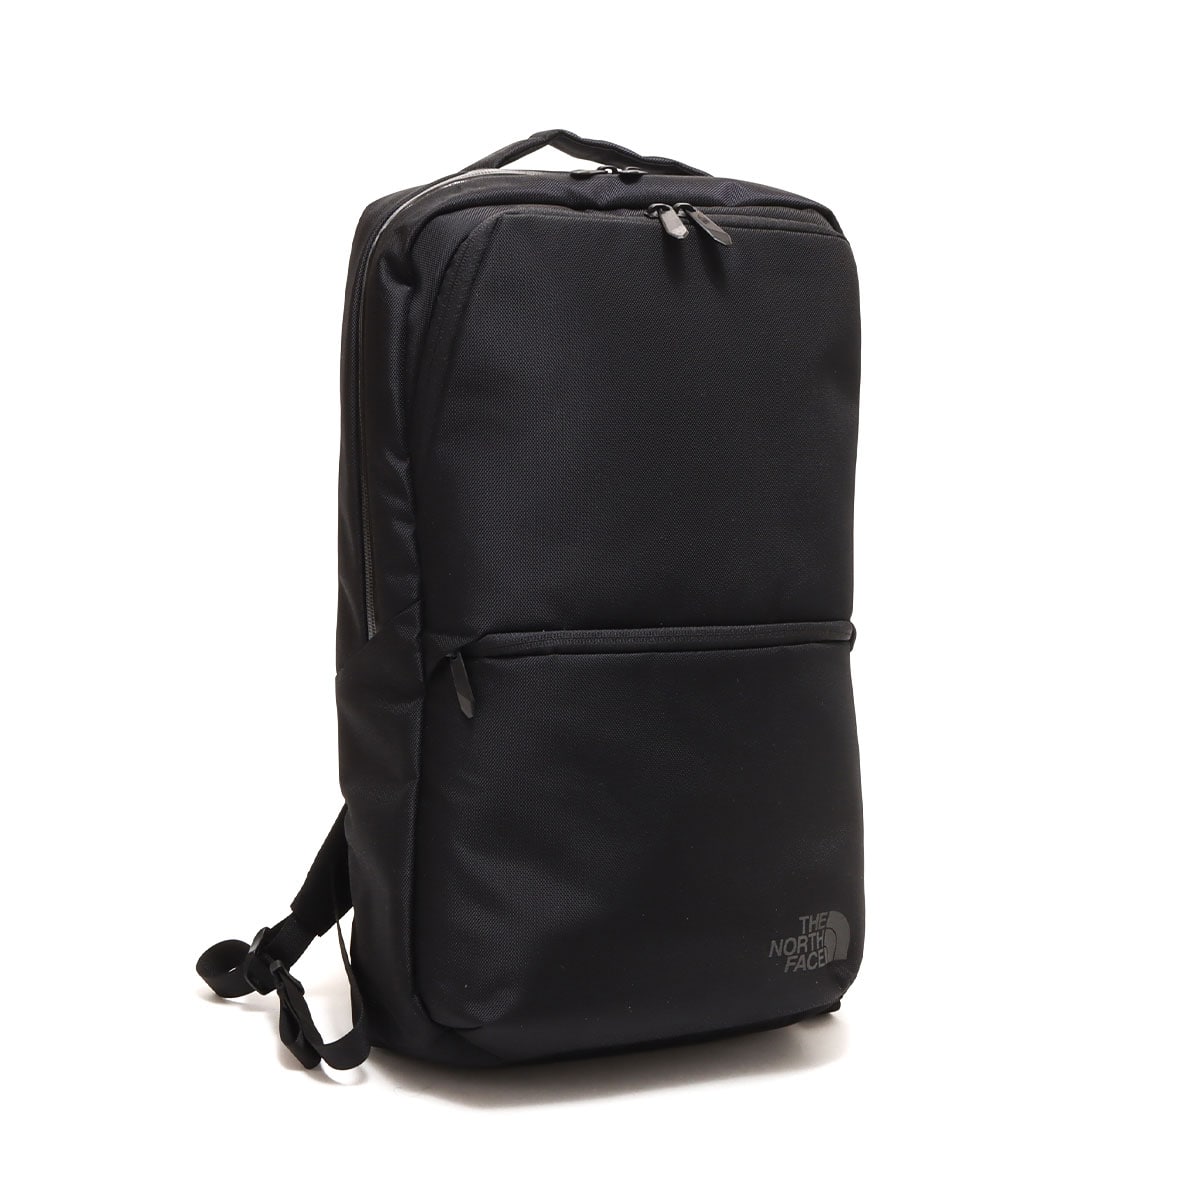 THE NORTH FACE SHUTTLE DAYPACK SLIM BLACK 22SS-I